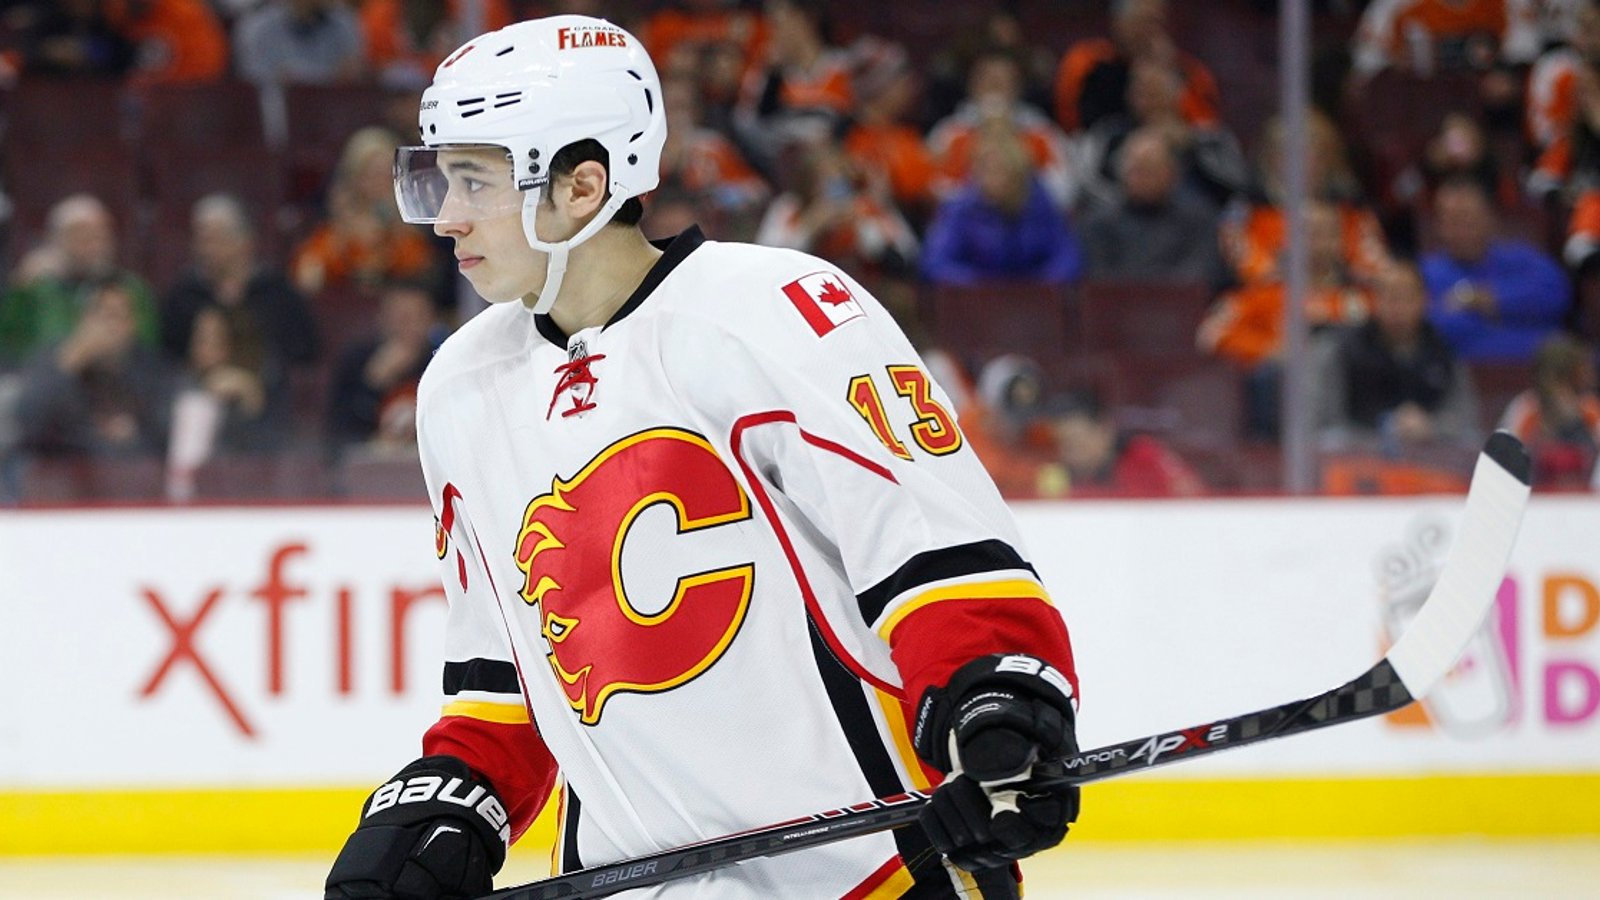 Report: Johnny Gaudreau has some bad news for the Flames and their fans.